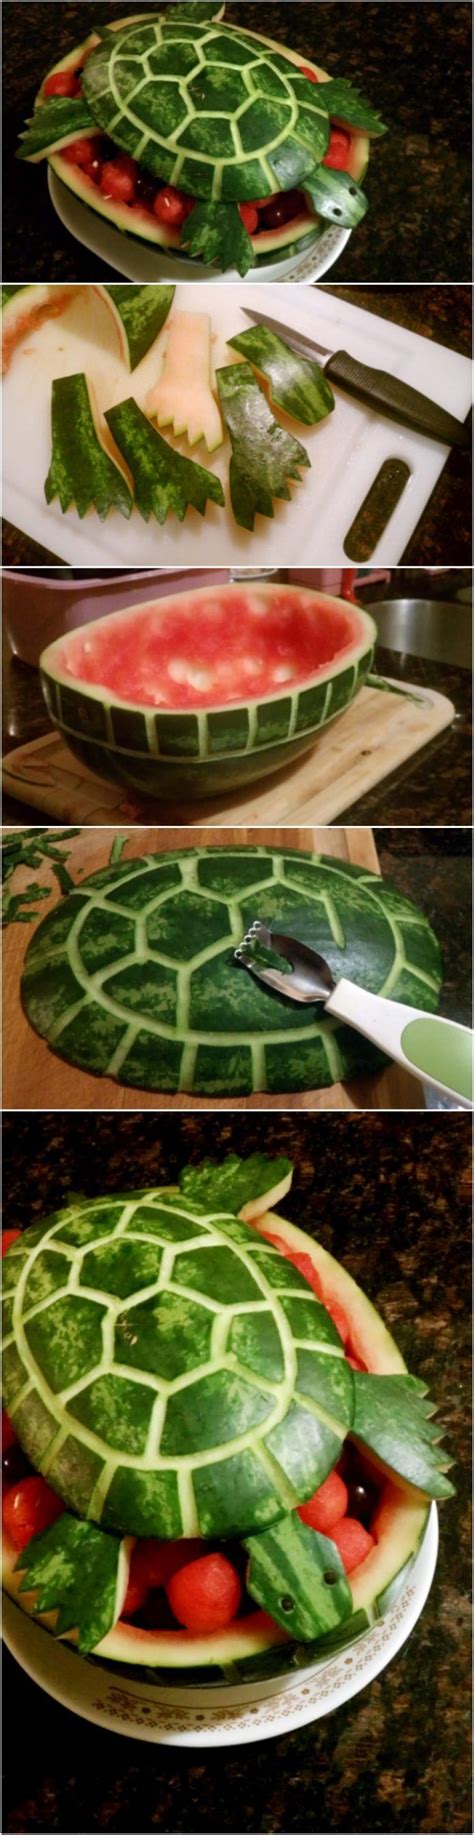 10 Watermelon Carving Ideas and Tutorials - Page 2 of 5 | Food carving, Watermelon carving ...